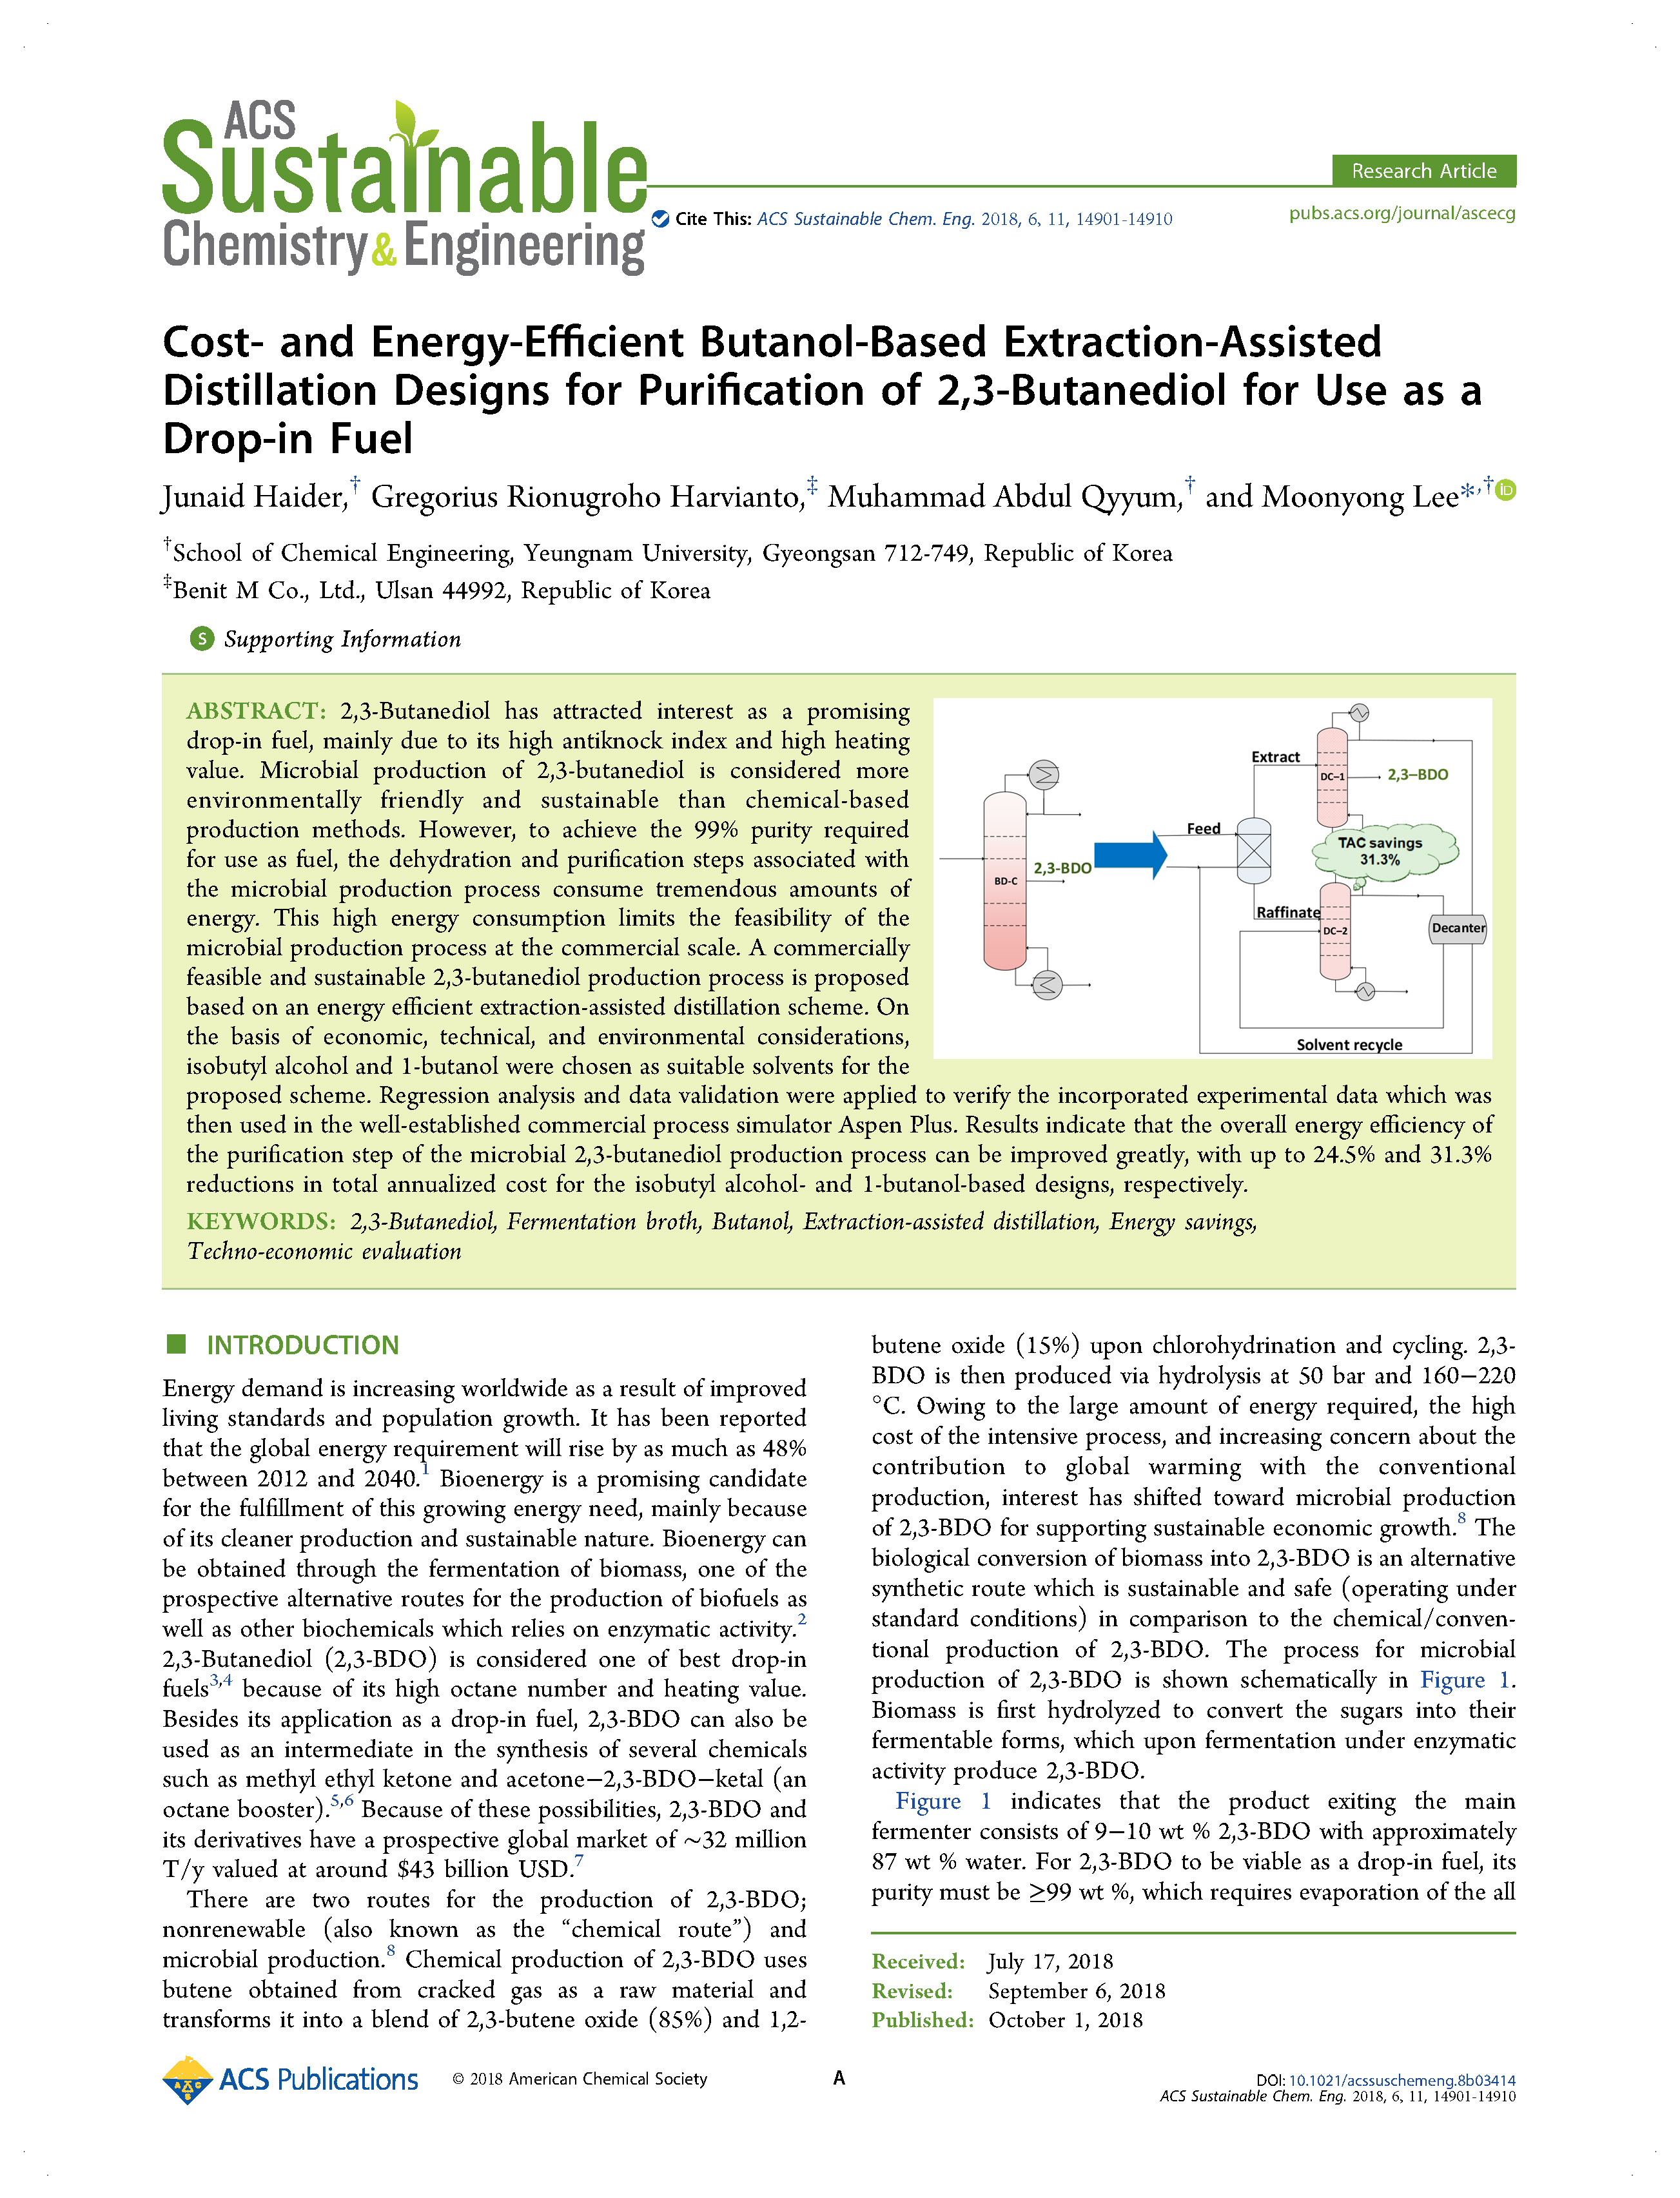 Cost- and Energy-Efficient Butanol-Based Extraction-Assisted Distillation Designs for Purification of 2,3-Butanediol for Use as a Drop-in Fuel